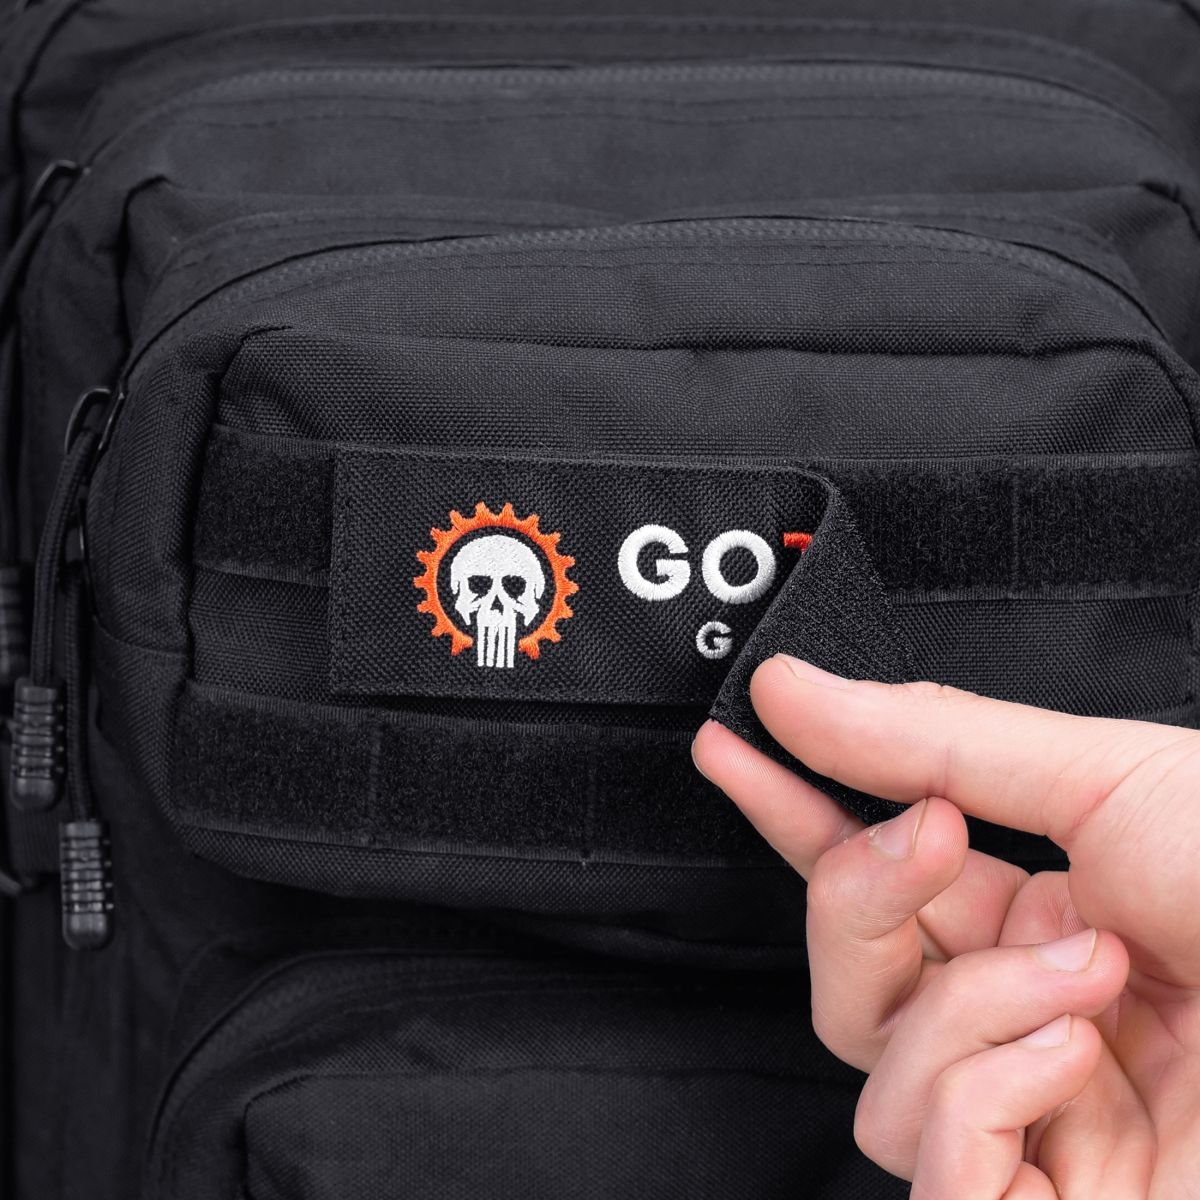 On The Go Backpack